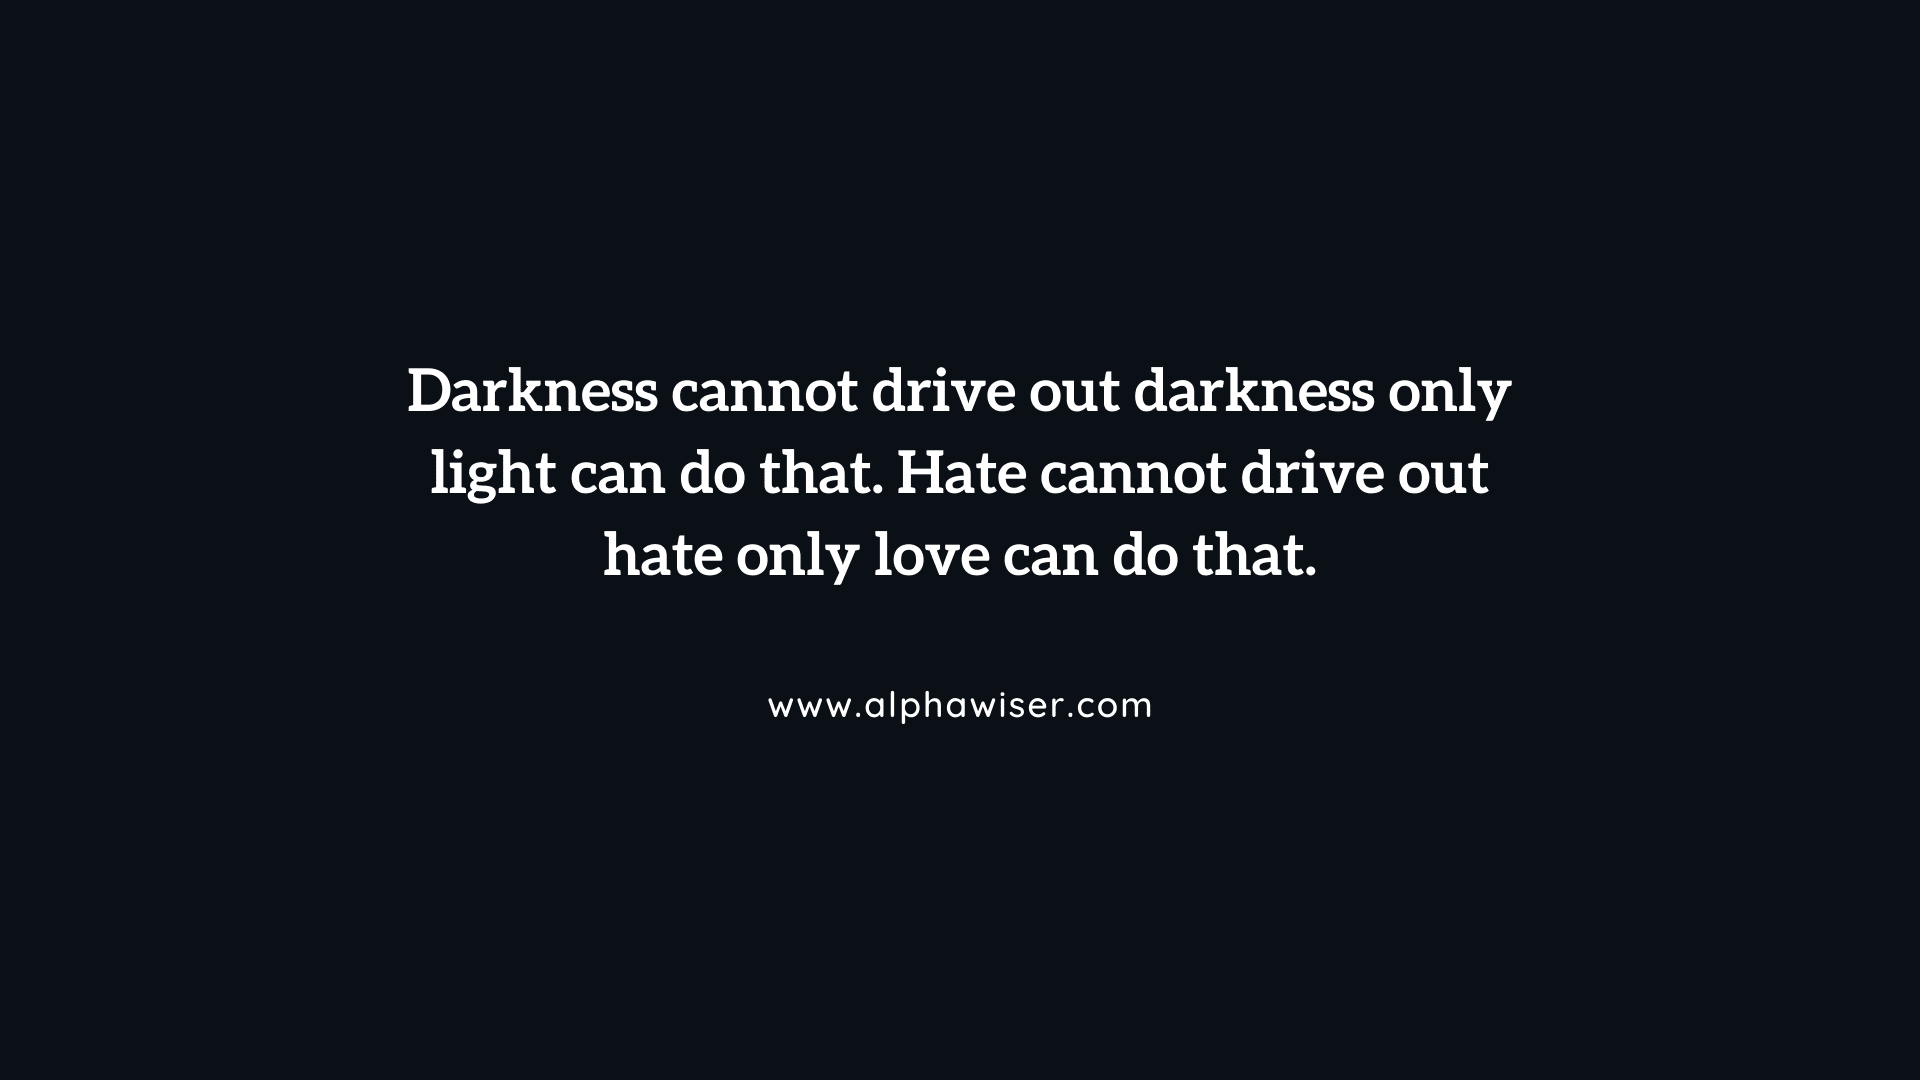 Darkness cannot drive out darkness only light can do that. Hate cannot drive out hate only love can do that.